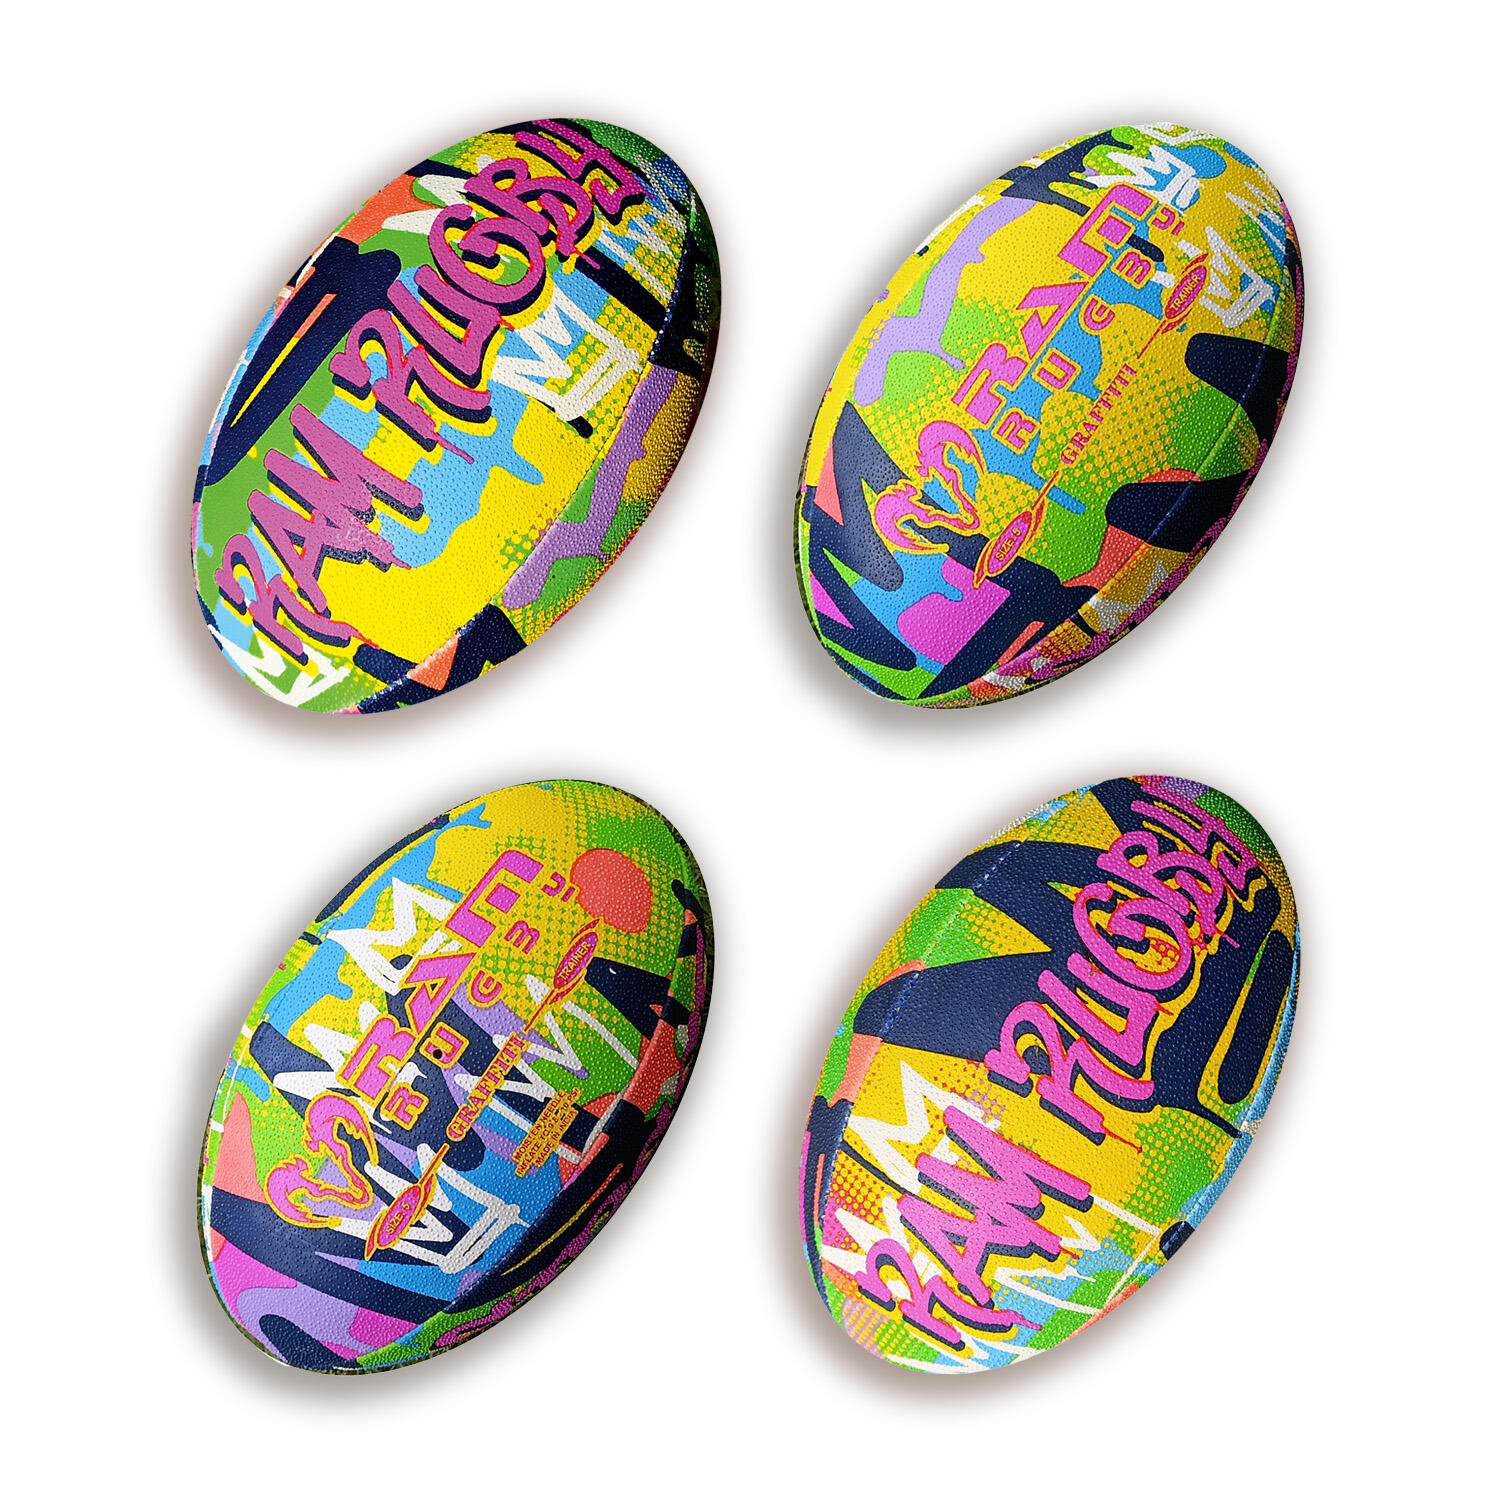 Ram Rugby Ball - Squad - Trainer - (Size 5) - Graffiti 2/2